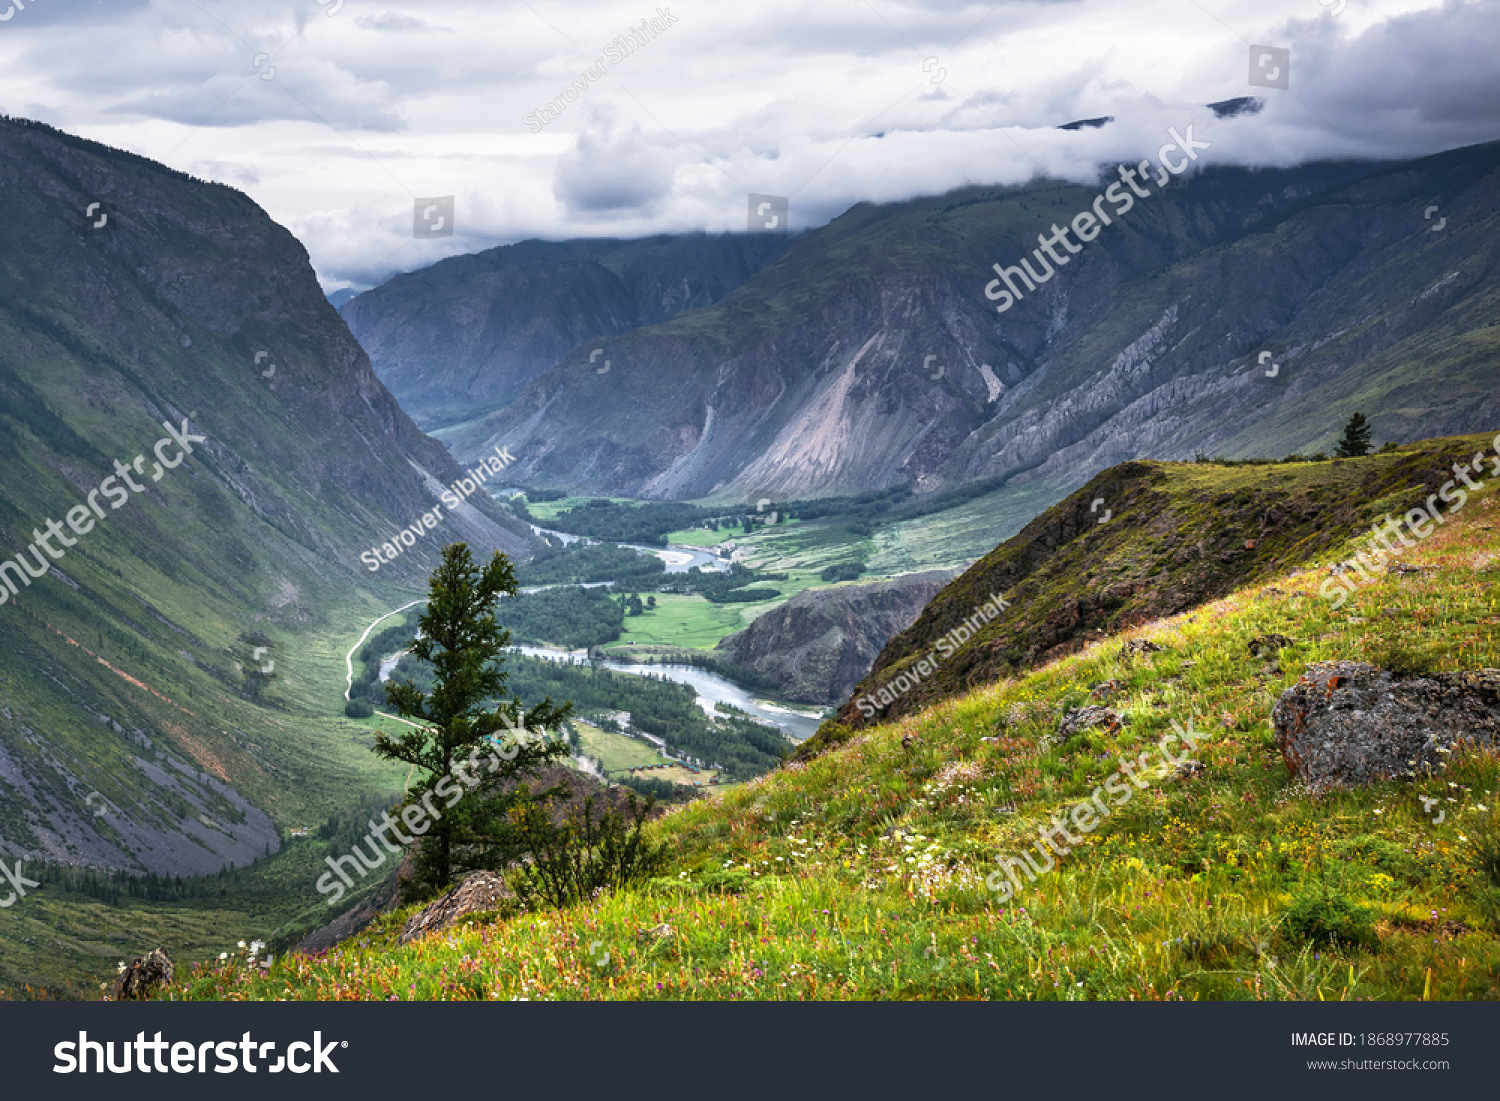 Valley of the Chulyshman River